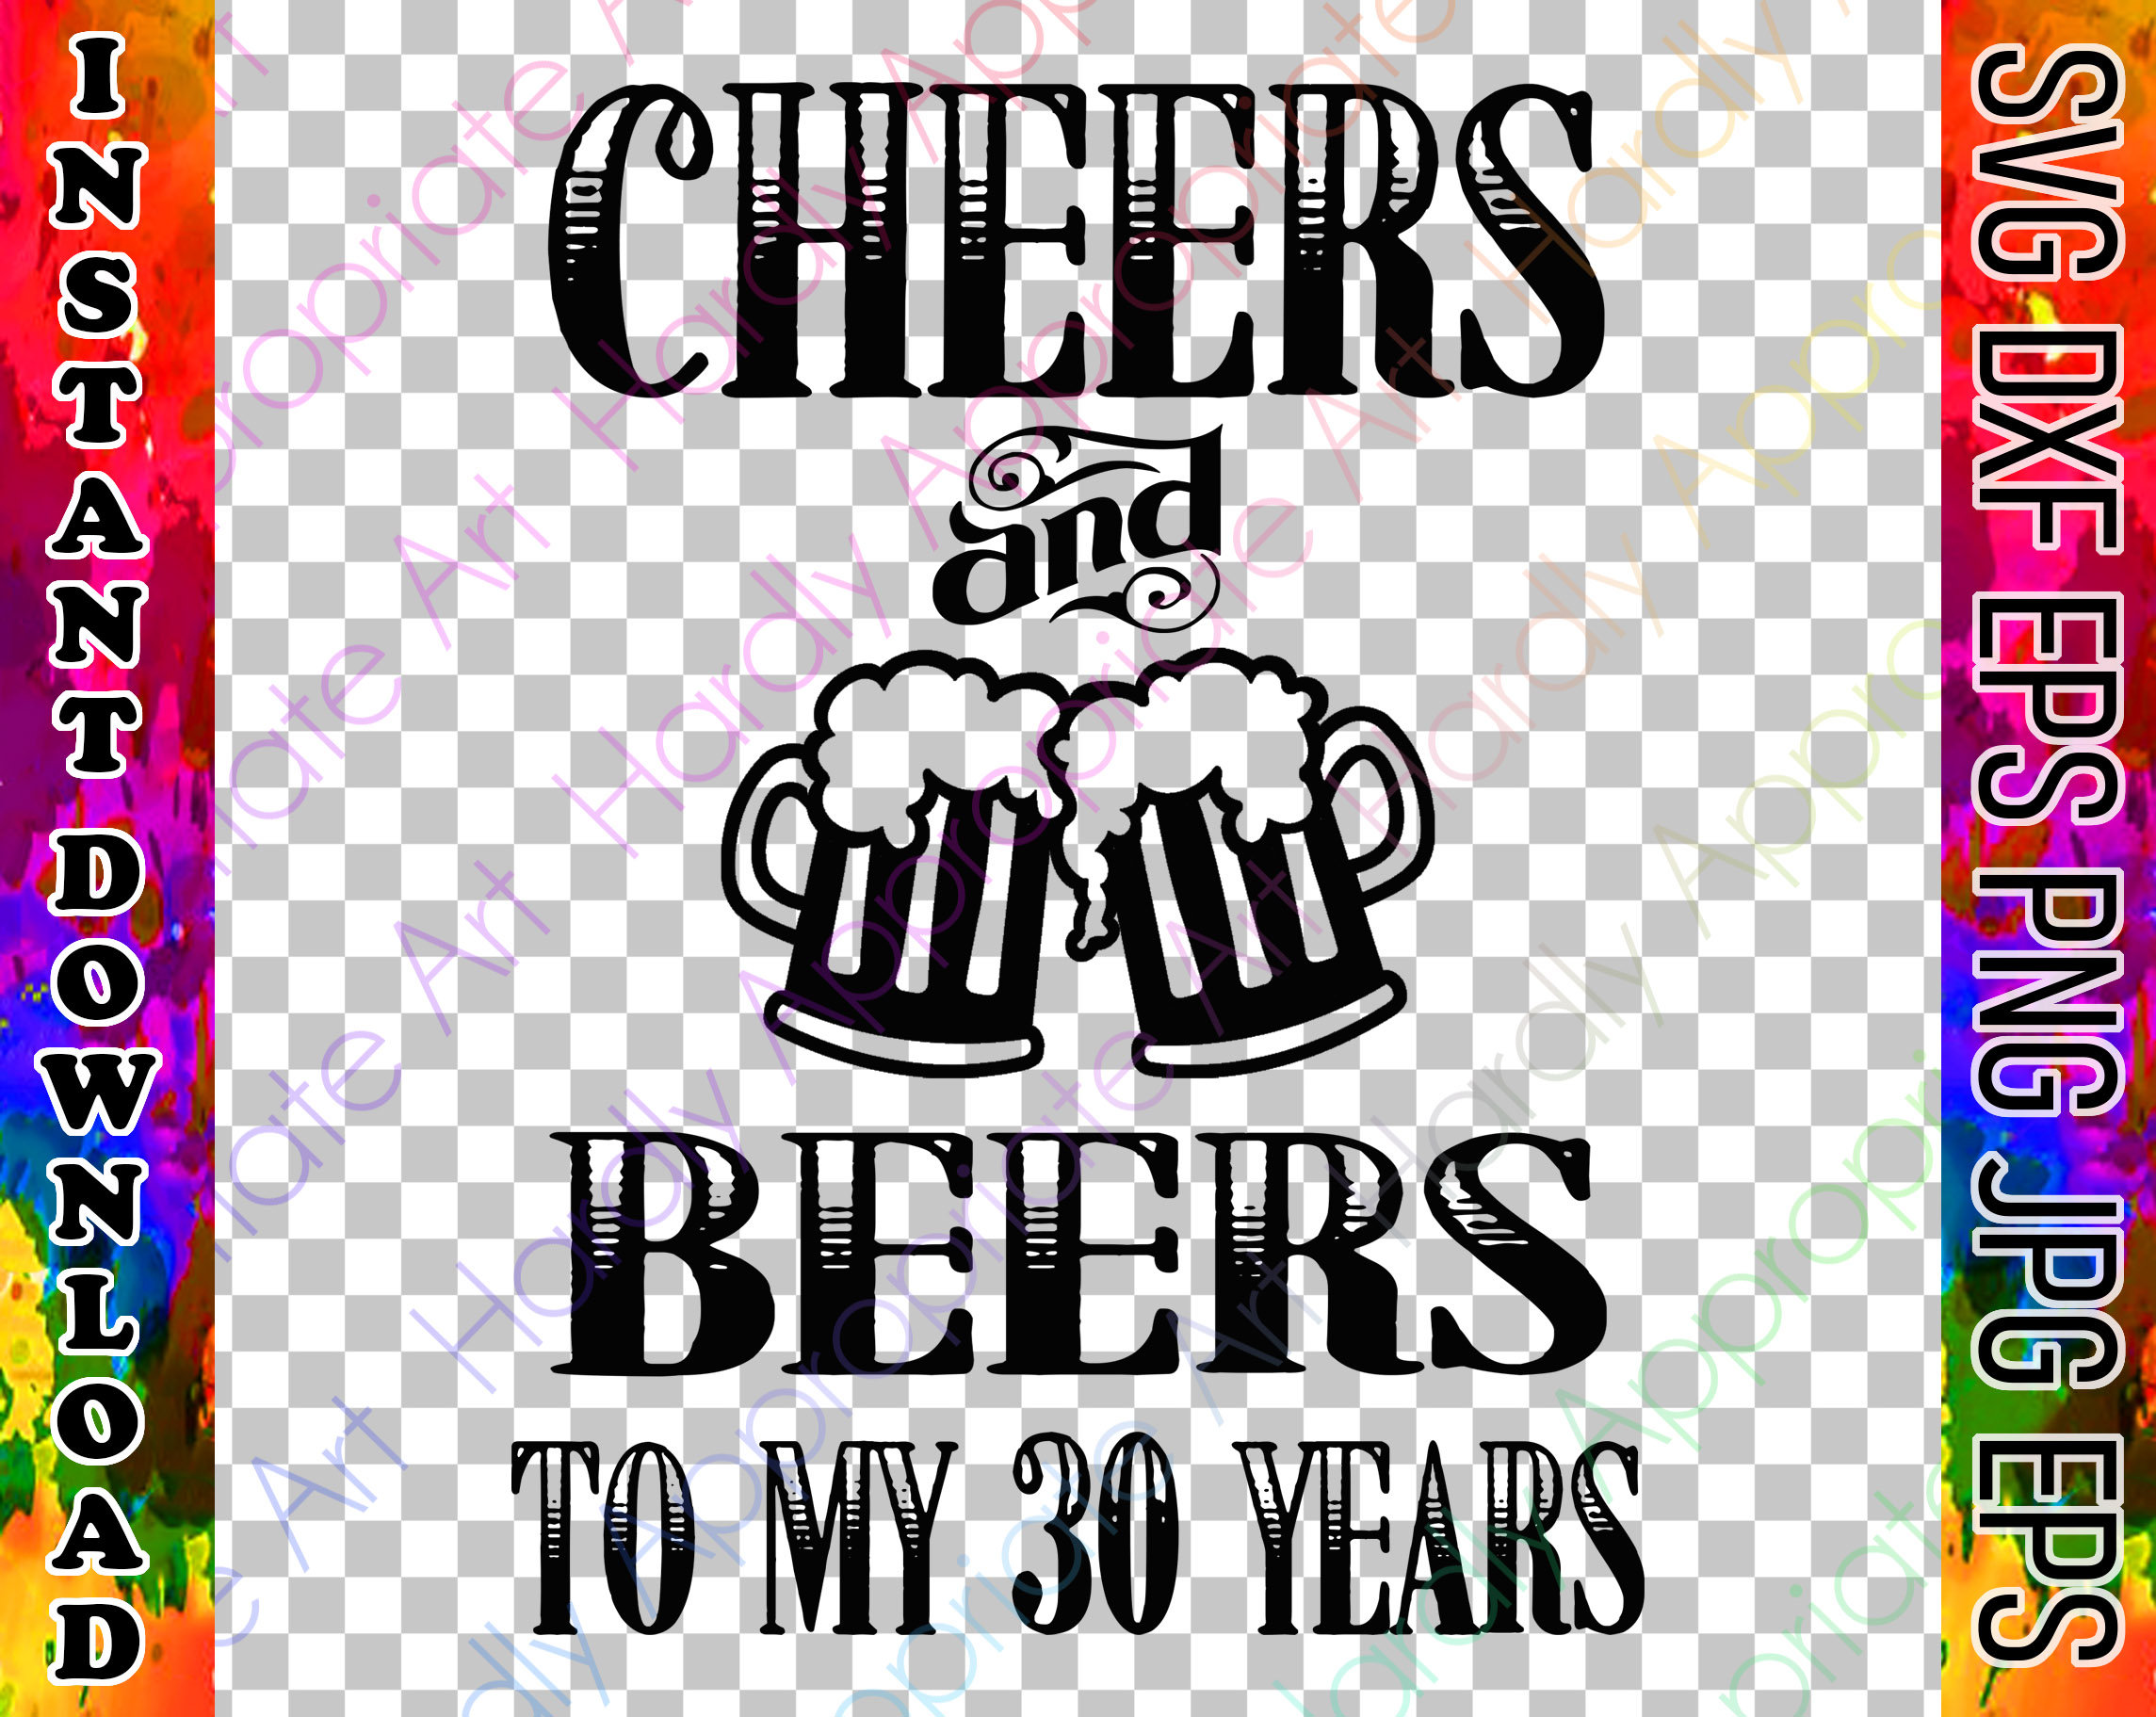 Cheers And Beers To My 30 Years SVG